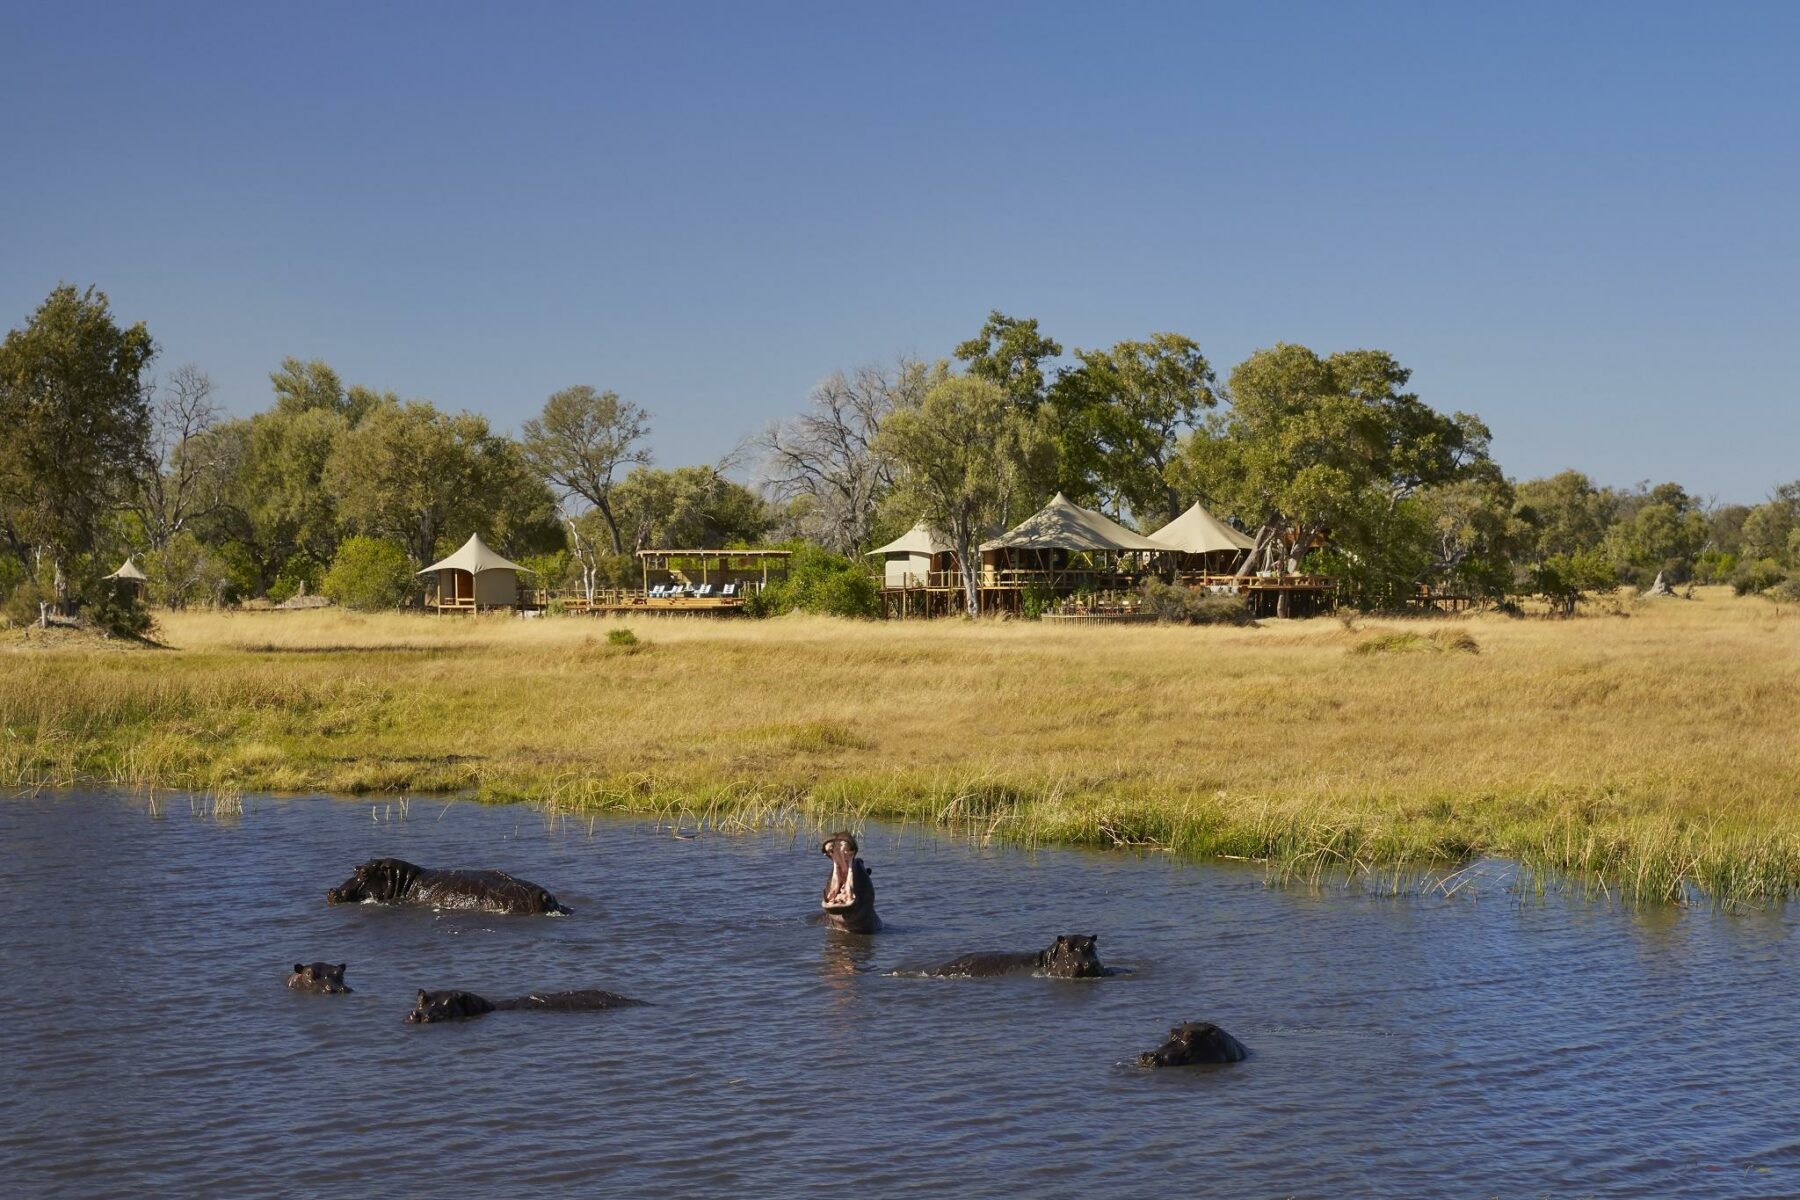 Hippos in front of Tuludi lodge